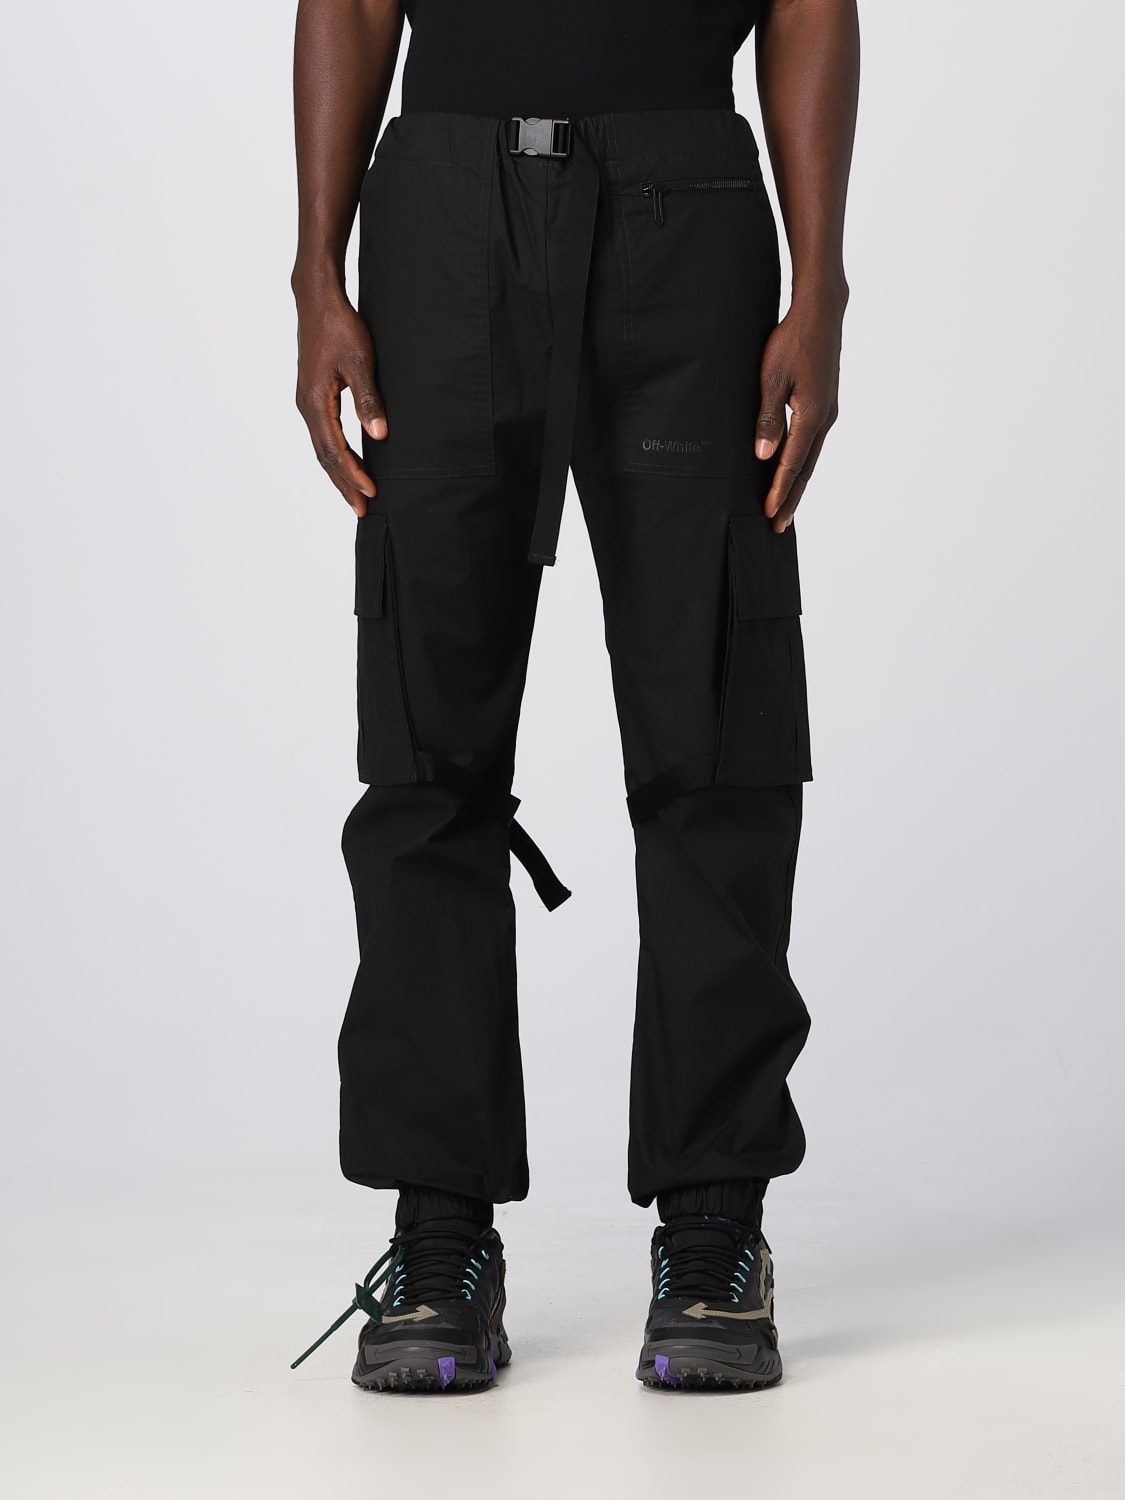 OFF-WHITE: pants in technical fabric - Black | Off-White pants ...